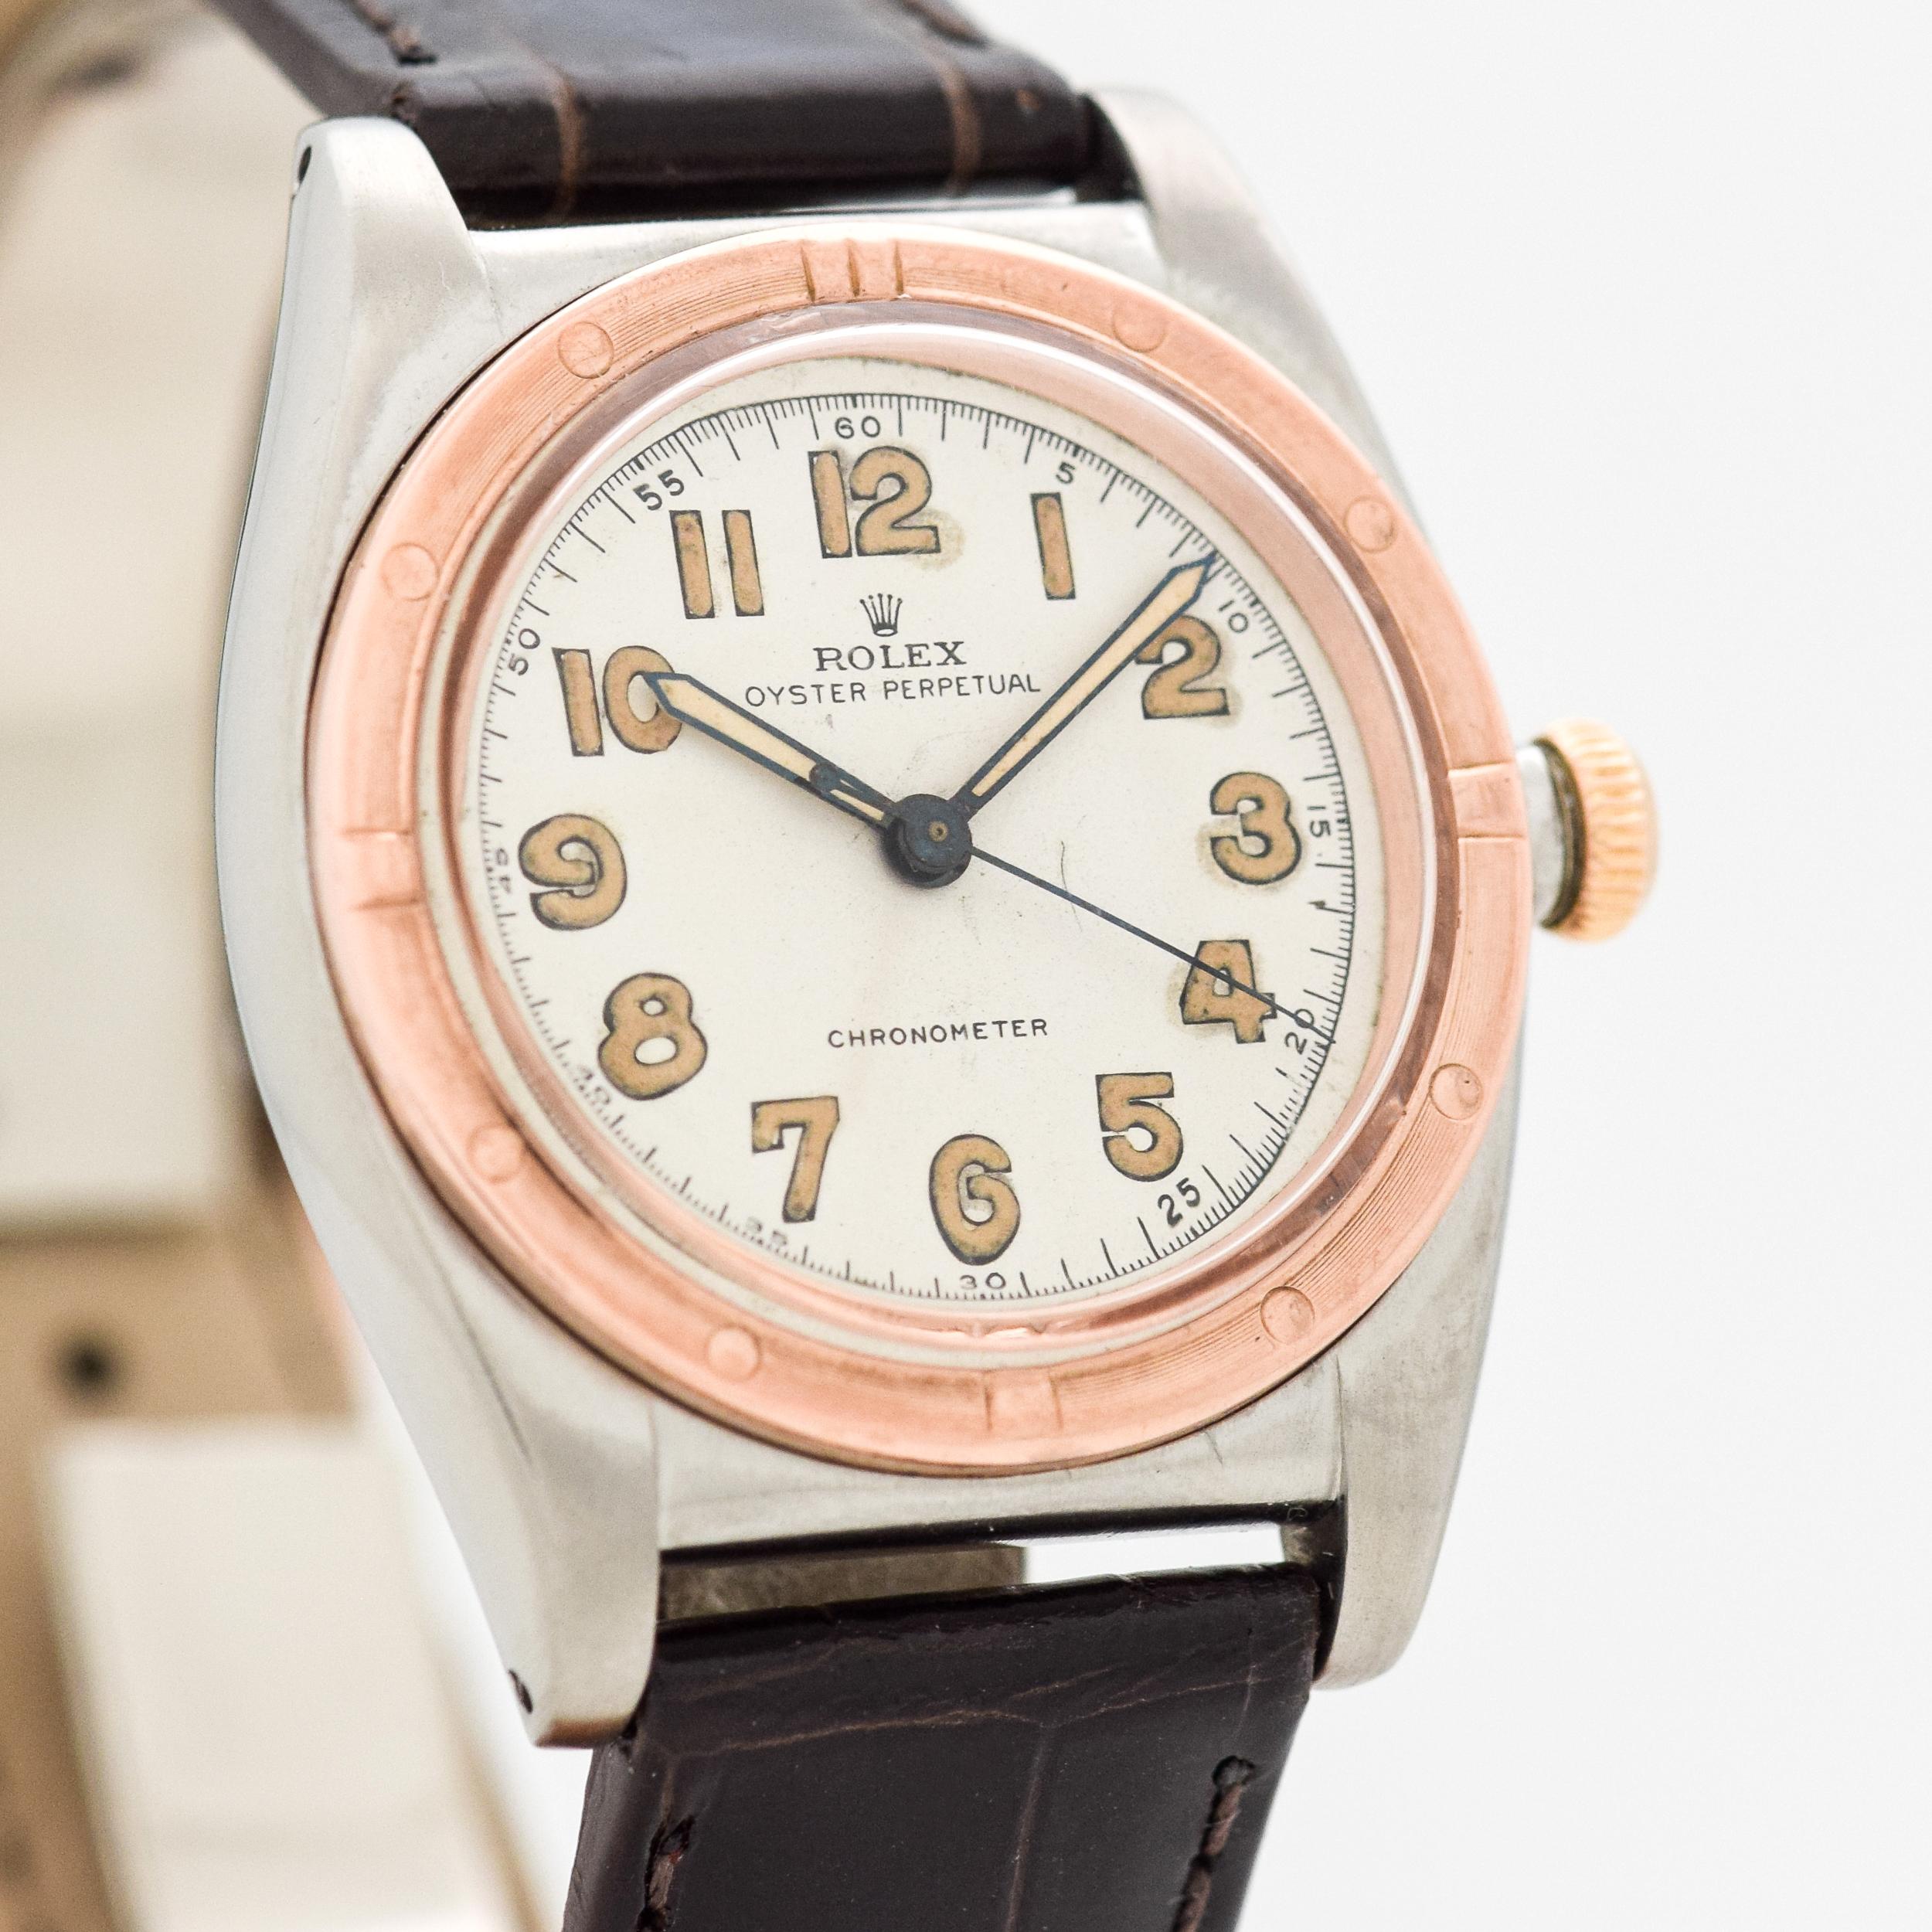 1944 Vintage Rolex Bubbleback Chronometer Ref. 3372 RARE Immediate Post WWII Two Tone 10k Rose Gold Machined Bezel with Stainless Steel Case watch with White Dial with Light Brown Luminous Arabic Numbers. 32mm x 38mm lug to lug (1.26 in. x 1.5 in.)